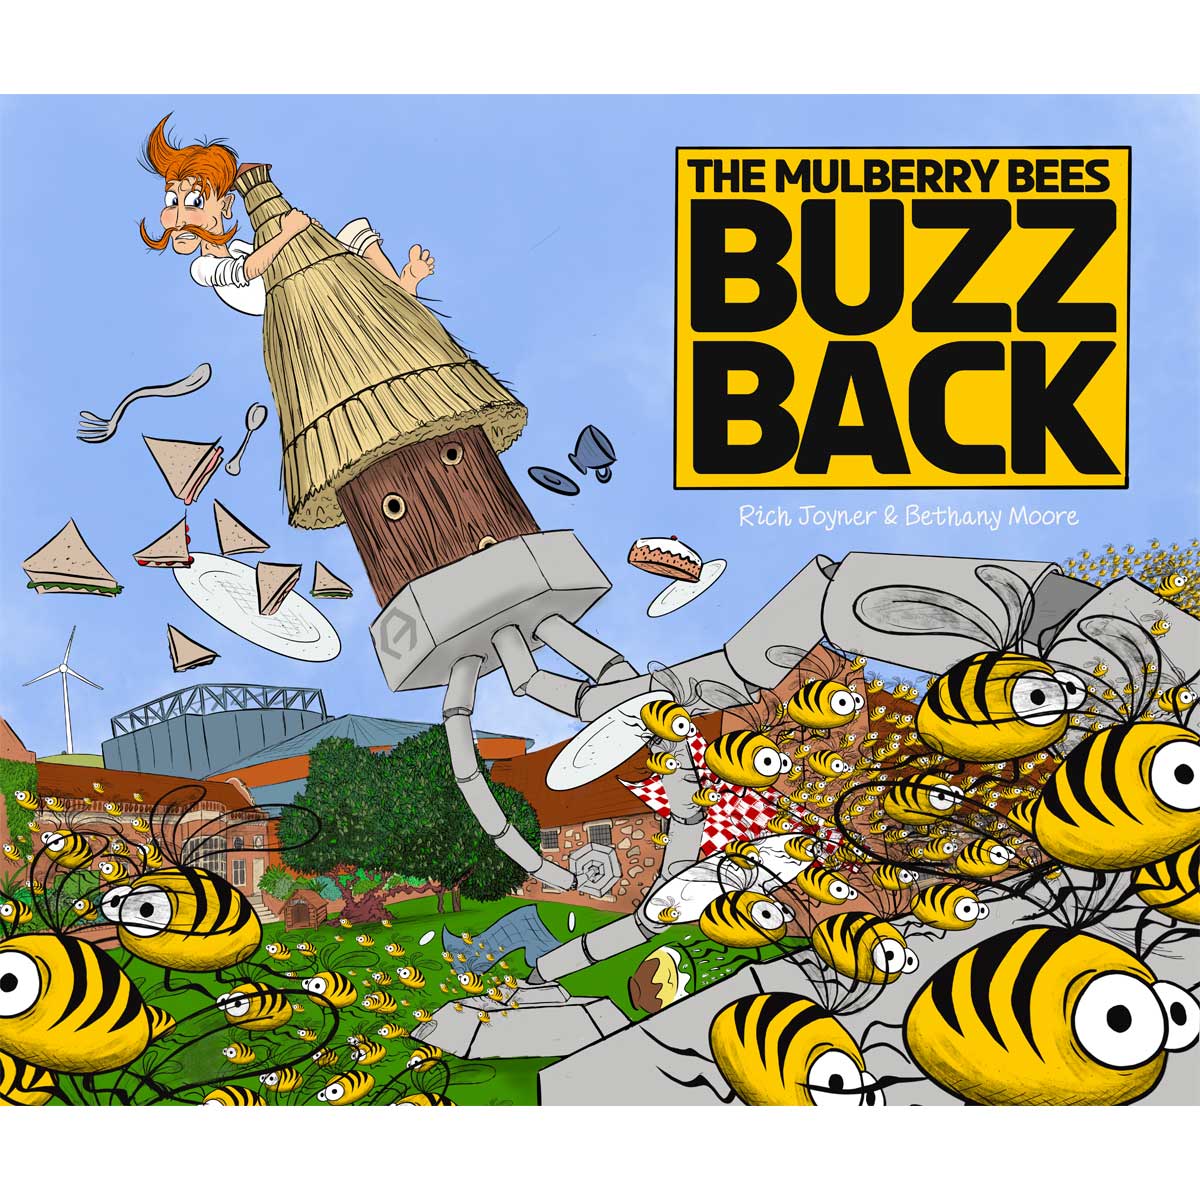 The Mulberry Bees Buzz Back by Rich Joyner & Bethany Moore